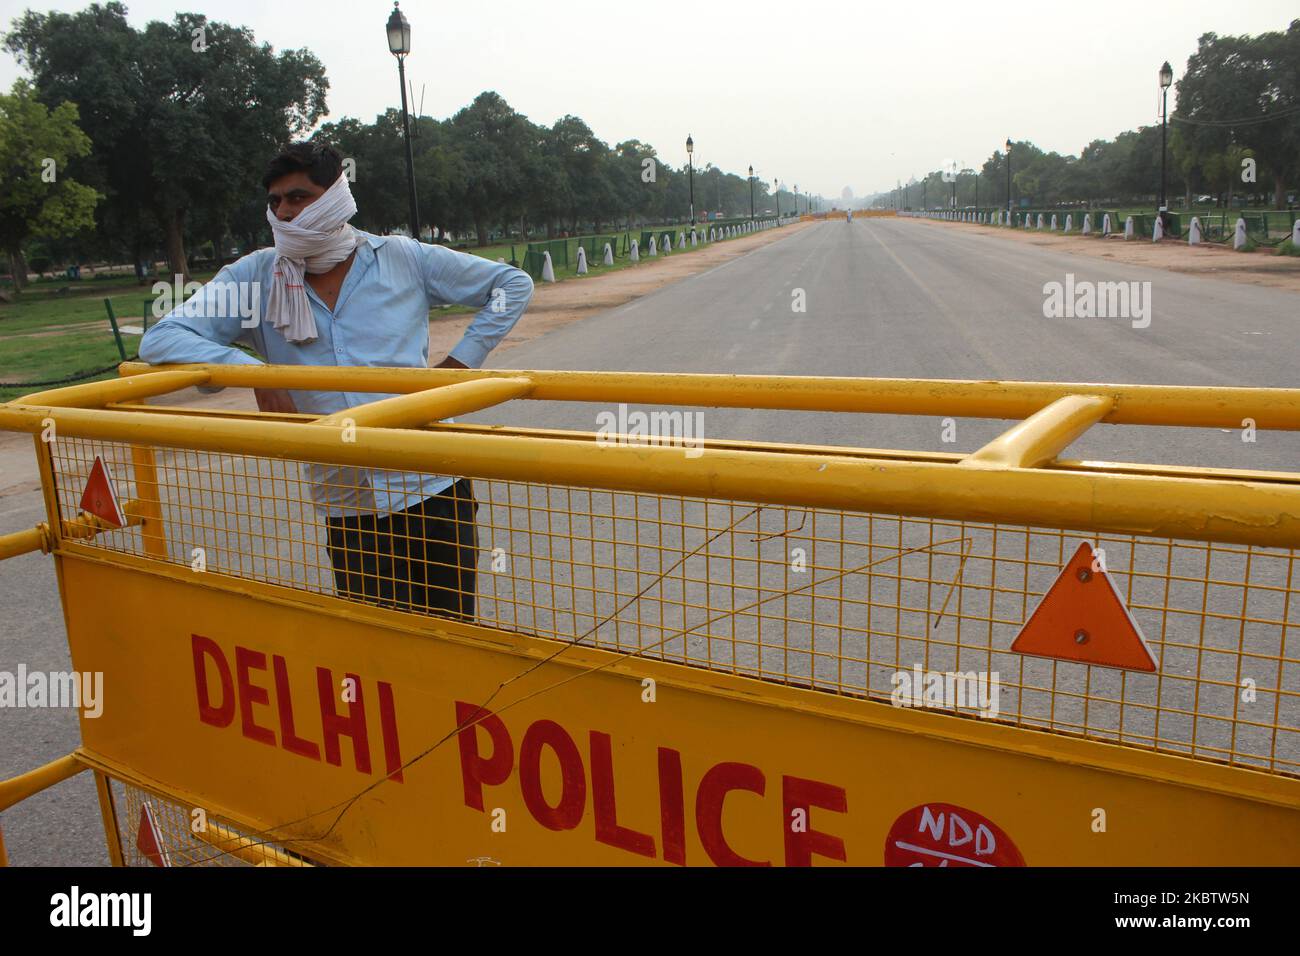 A deserted view of India Gate on July 18, 2020 in New Delhi as it remains closed to curb the spread of coronavirus in the national capital. Amid the threat of coronavirus spread, the India Gate and the War Memorial has been closed for the visitors till further notice. The shut down comes in a bid to curb mass gathering and public exposure to avoid the transmission of COVID-19 virus. (Photo by Mayank Makhija/NurPhoto) Stock Photo